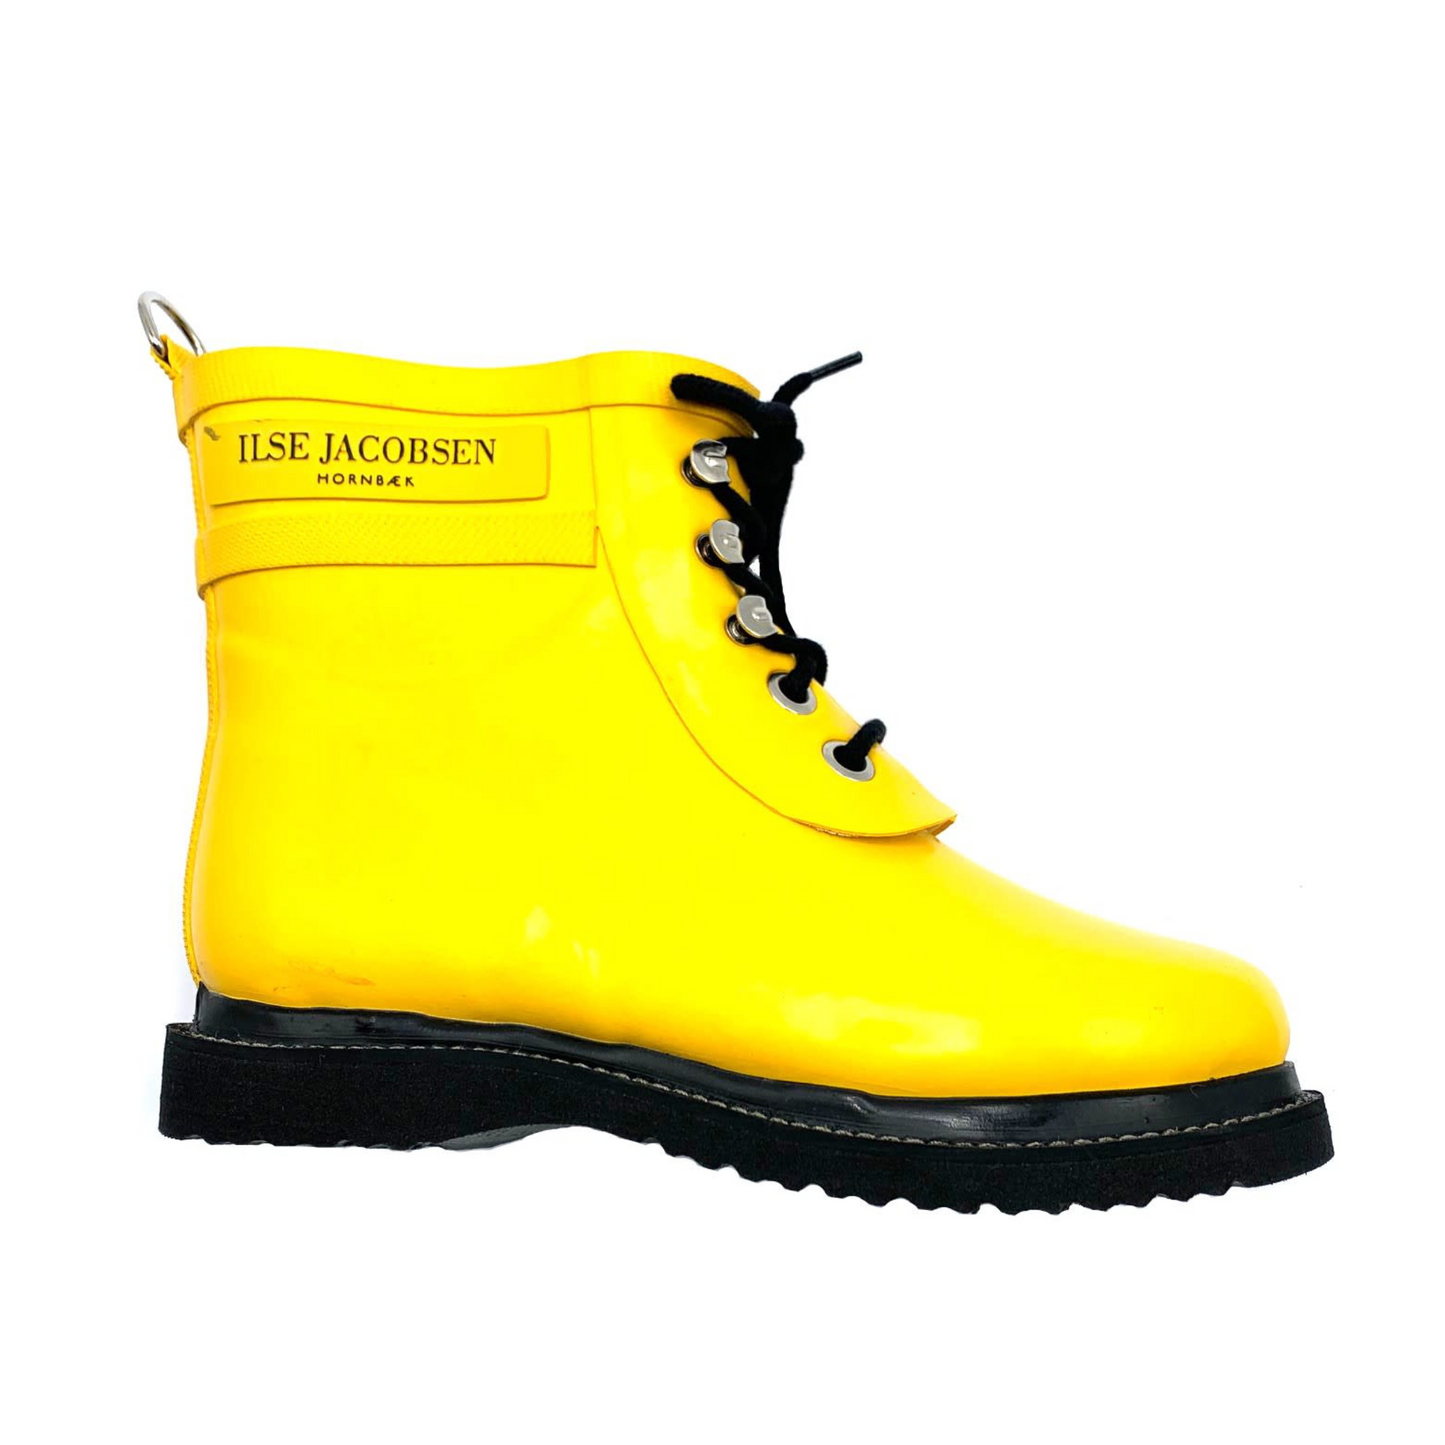 A right side view of a yellow rain boot with black details.